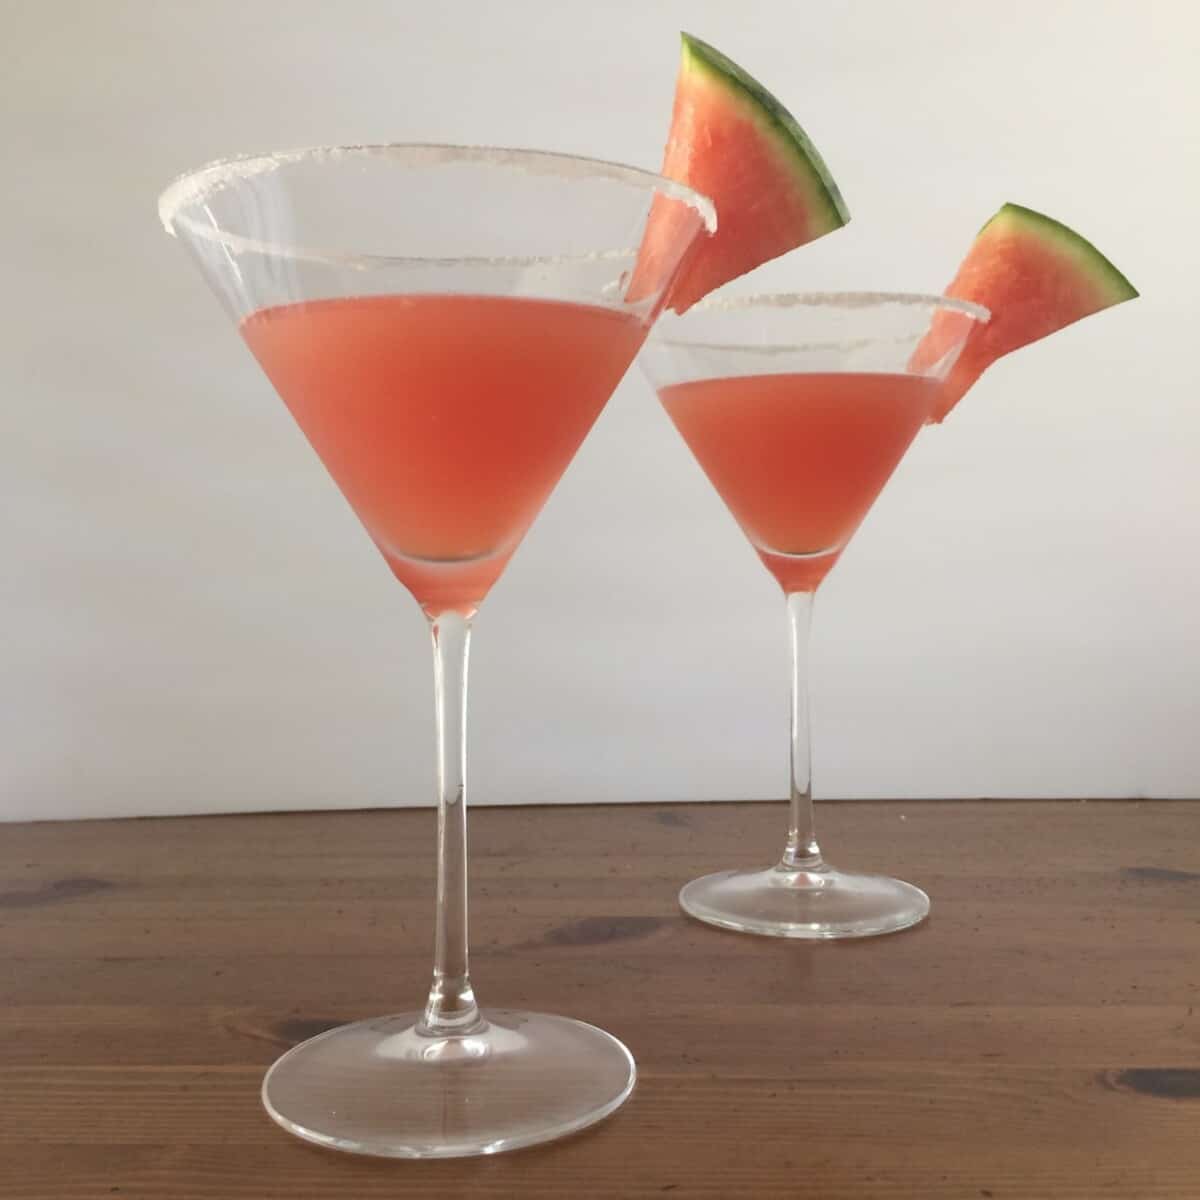 Watermelon Mint Martini The Short Order Cook